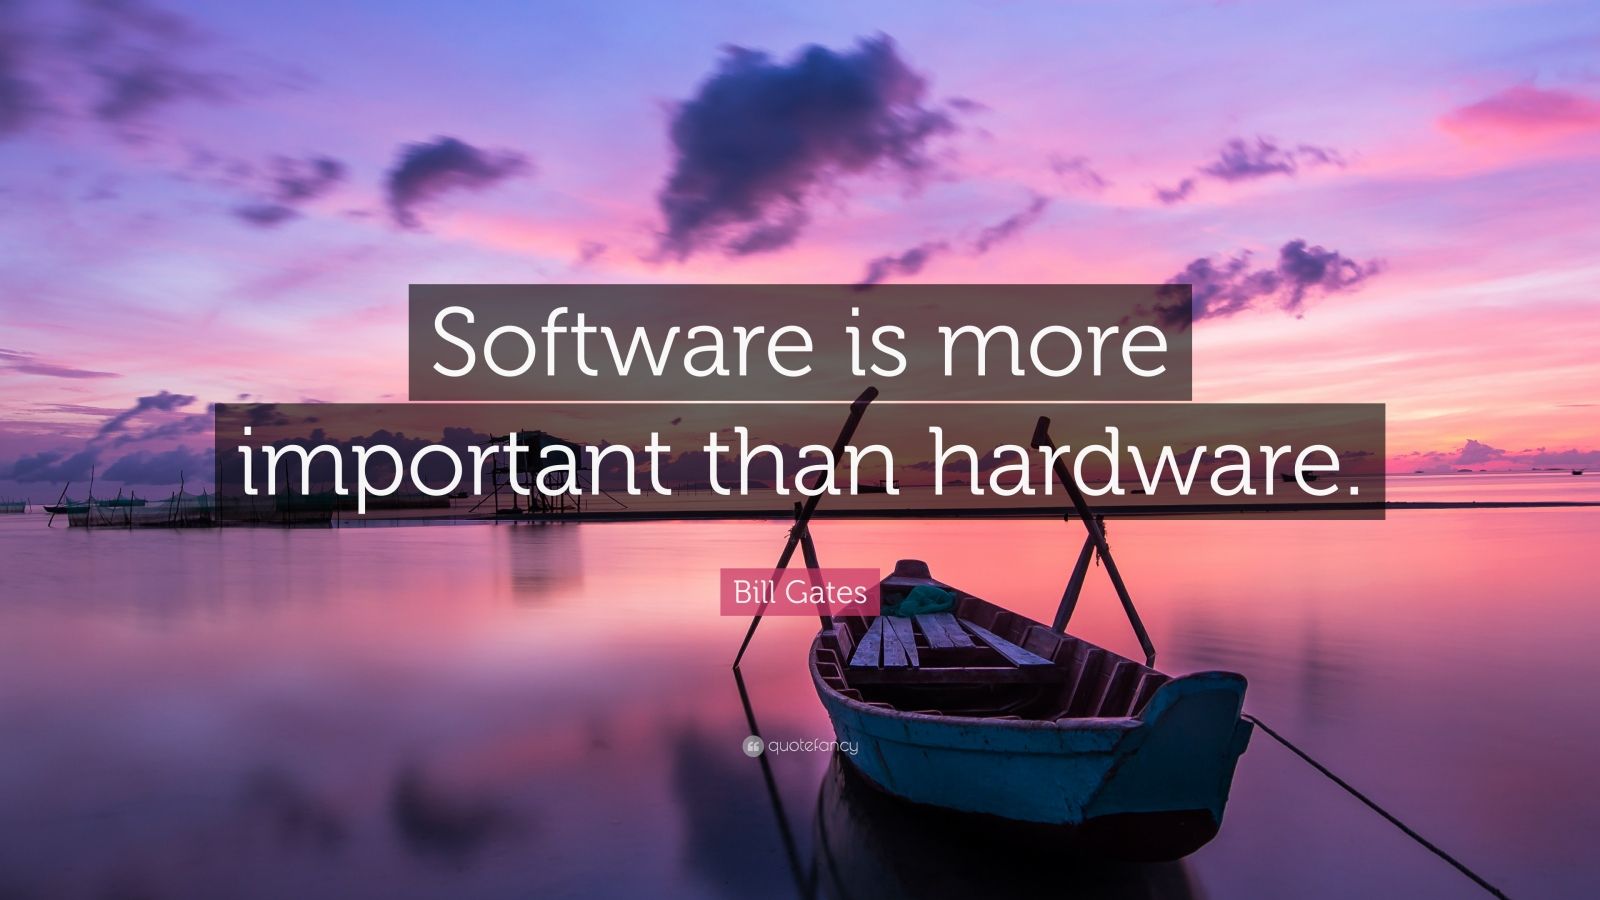 Bill Gates Quote: "Software is more important than ...